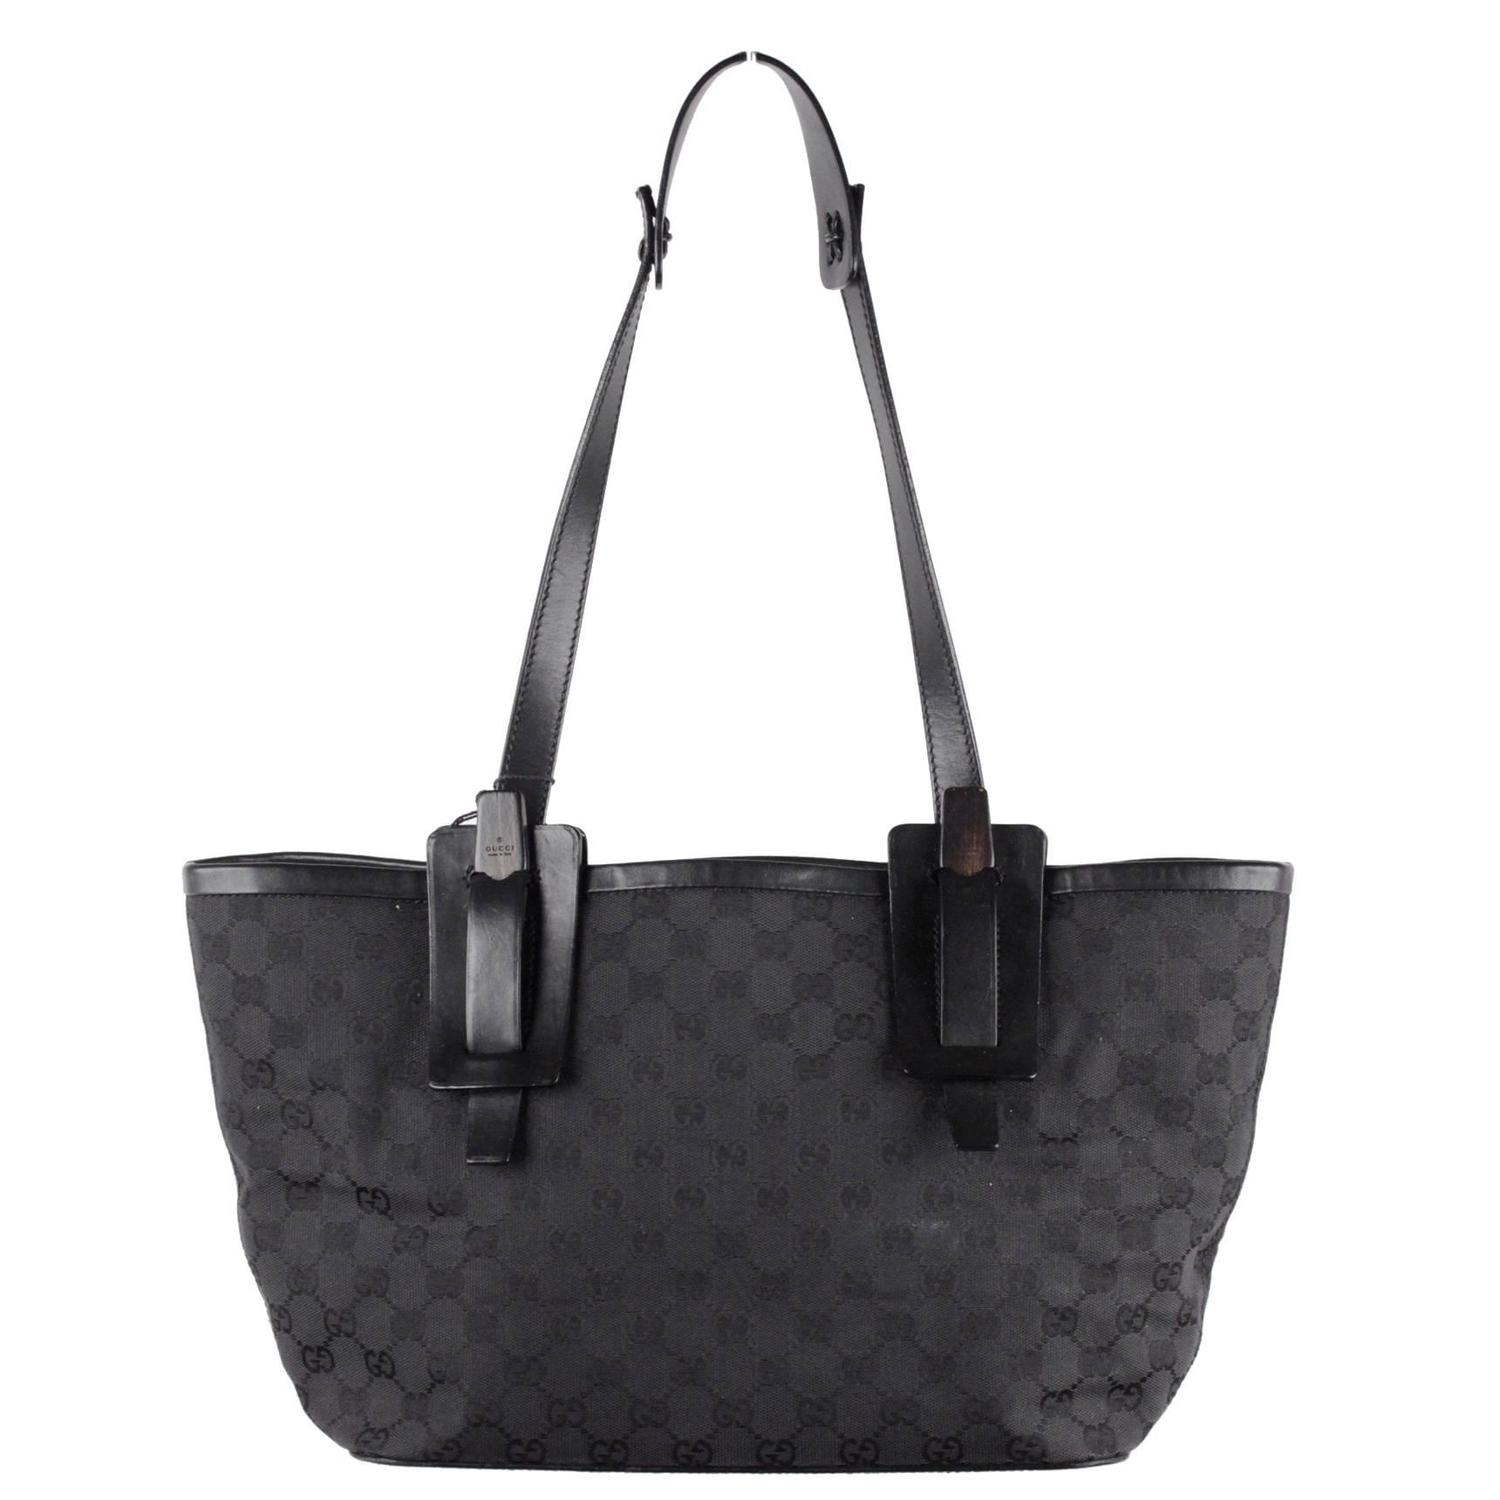 GUCCI Black GG MONOGRAM Canvas TOTE Shopping SHOULDER BAG Wood Accents For Sale at 1stdibs